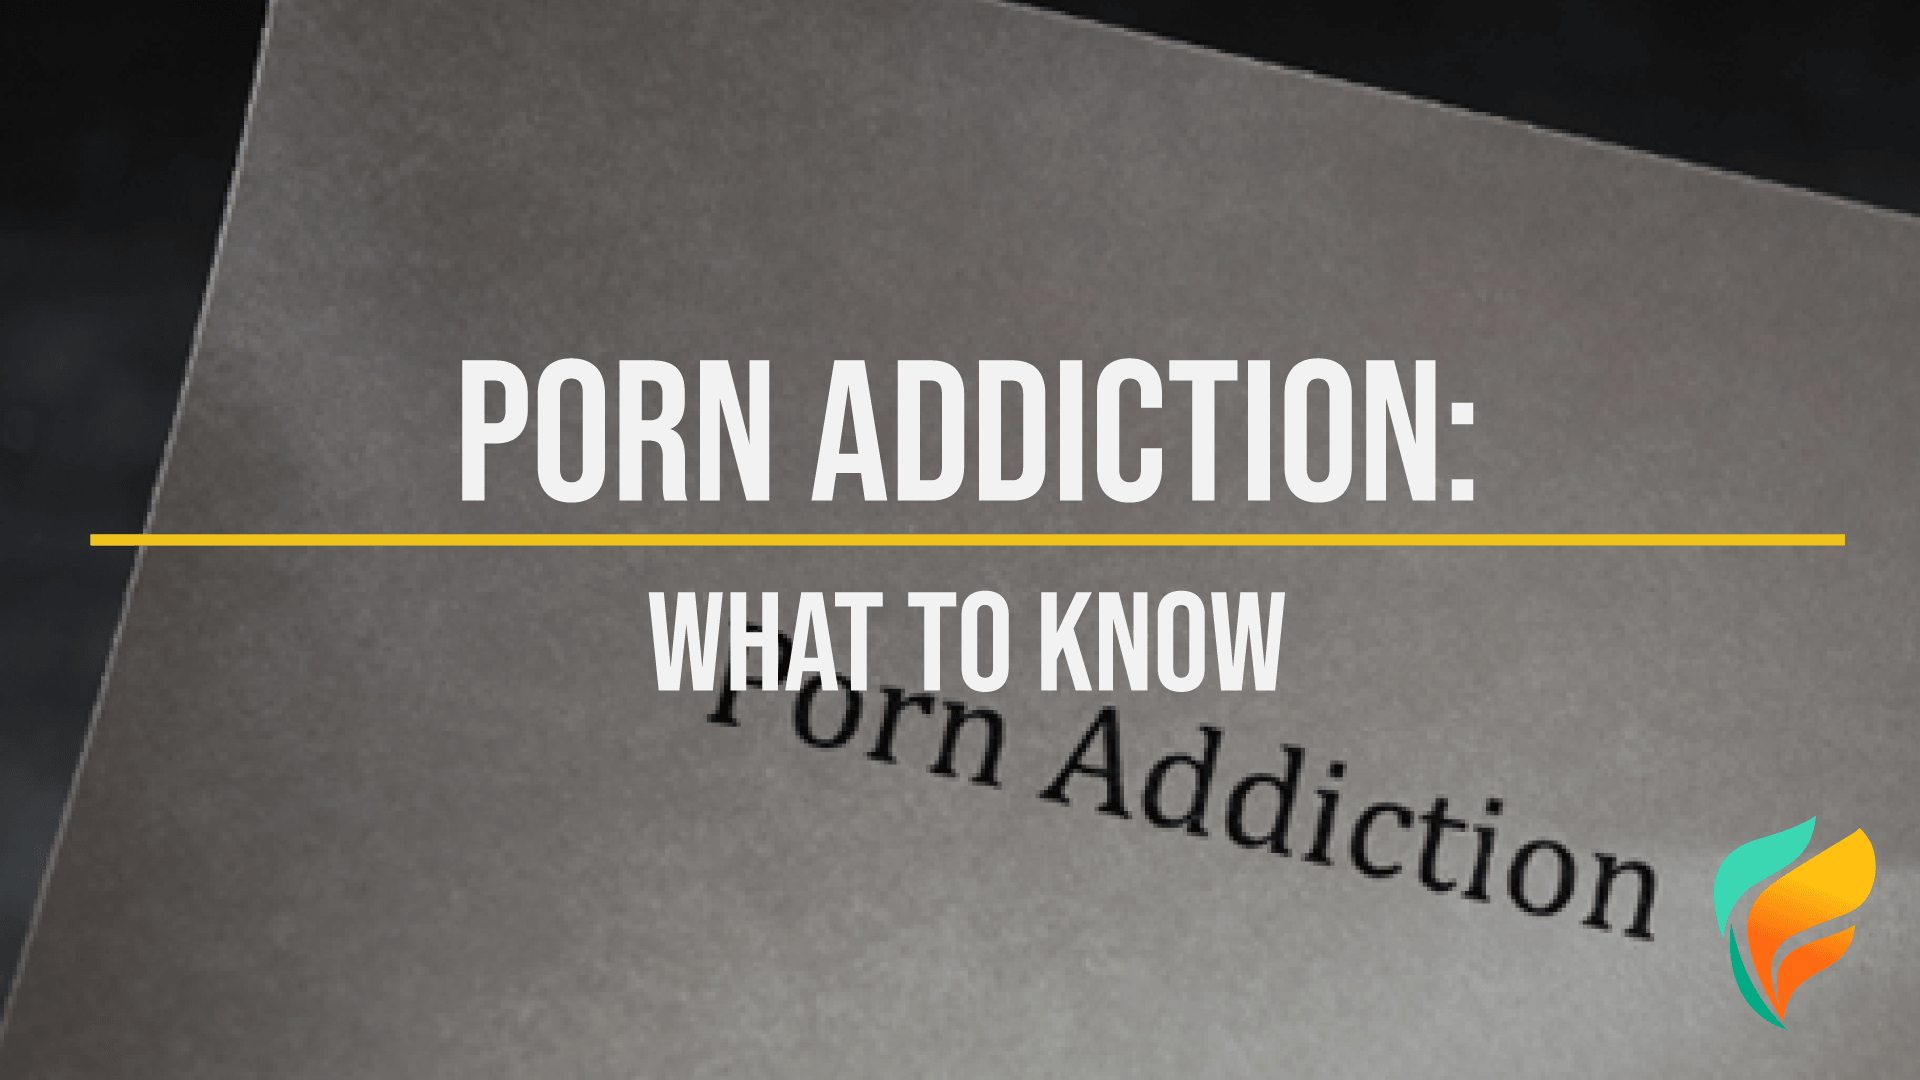 Addiction to Porn: The Facts About Pornography Addiction